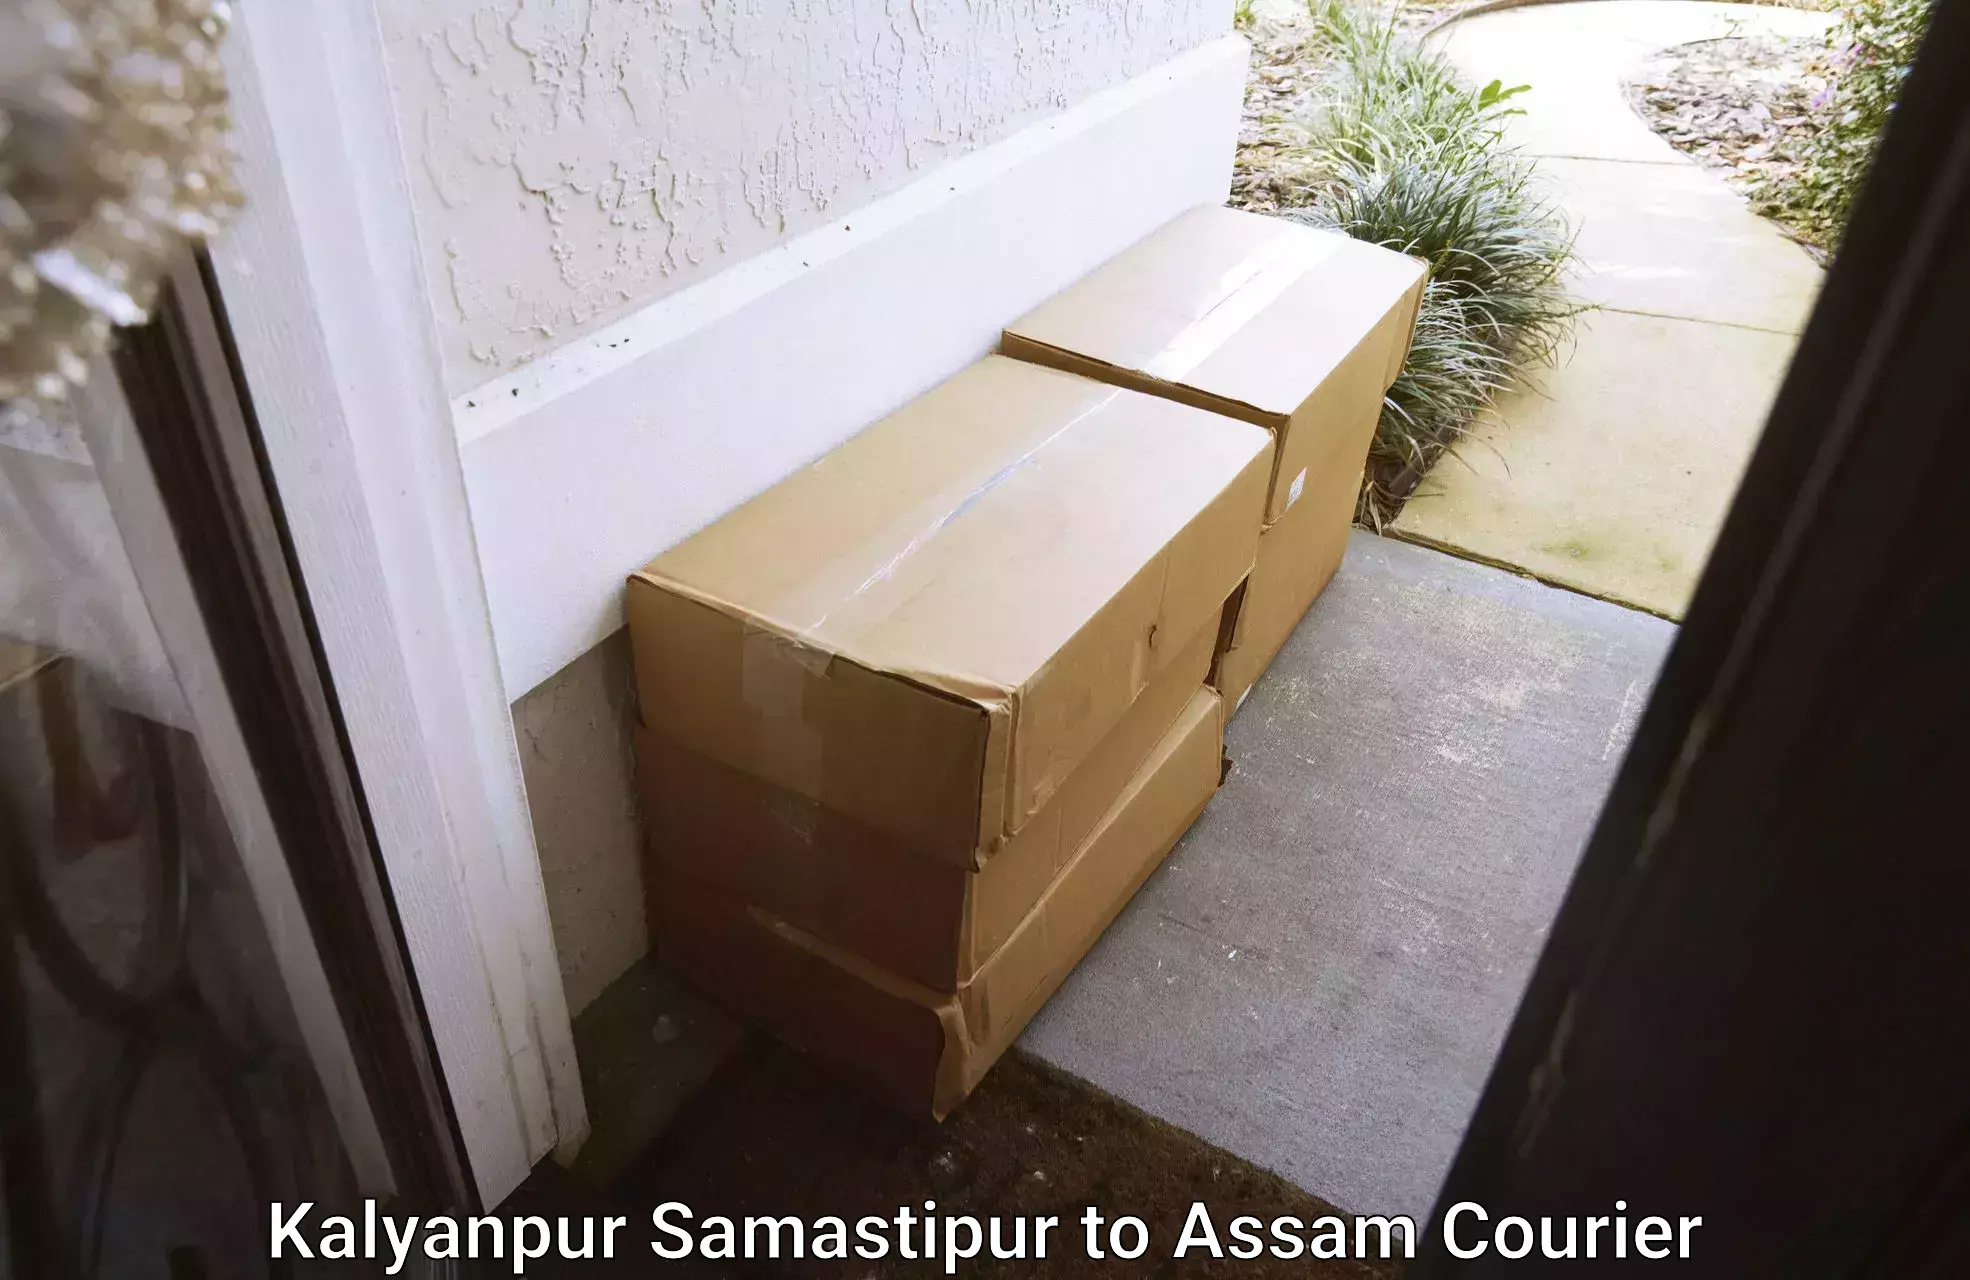 High-quality moving services in Kalyanpur Samastipur to Guwahati